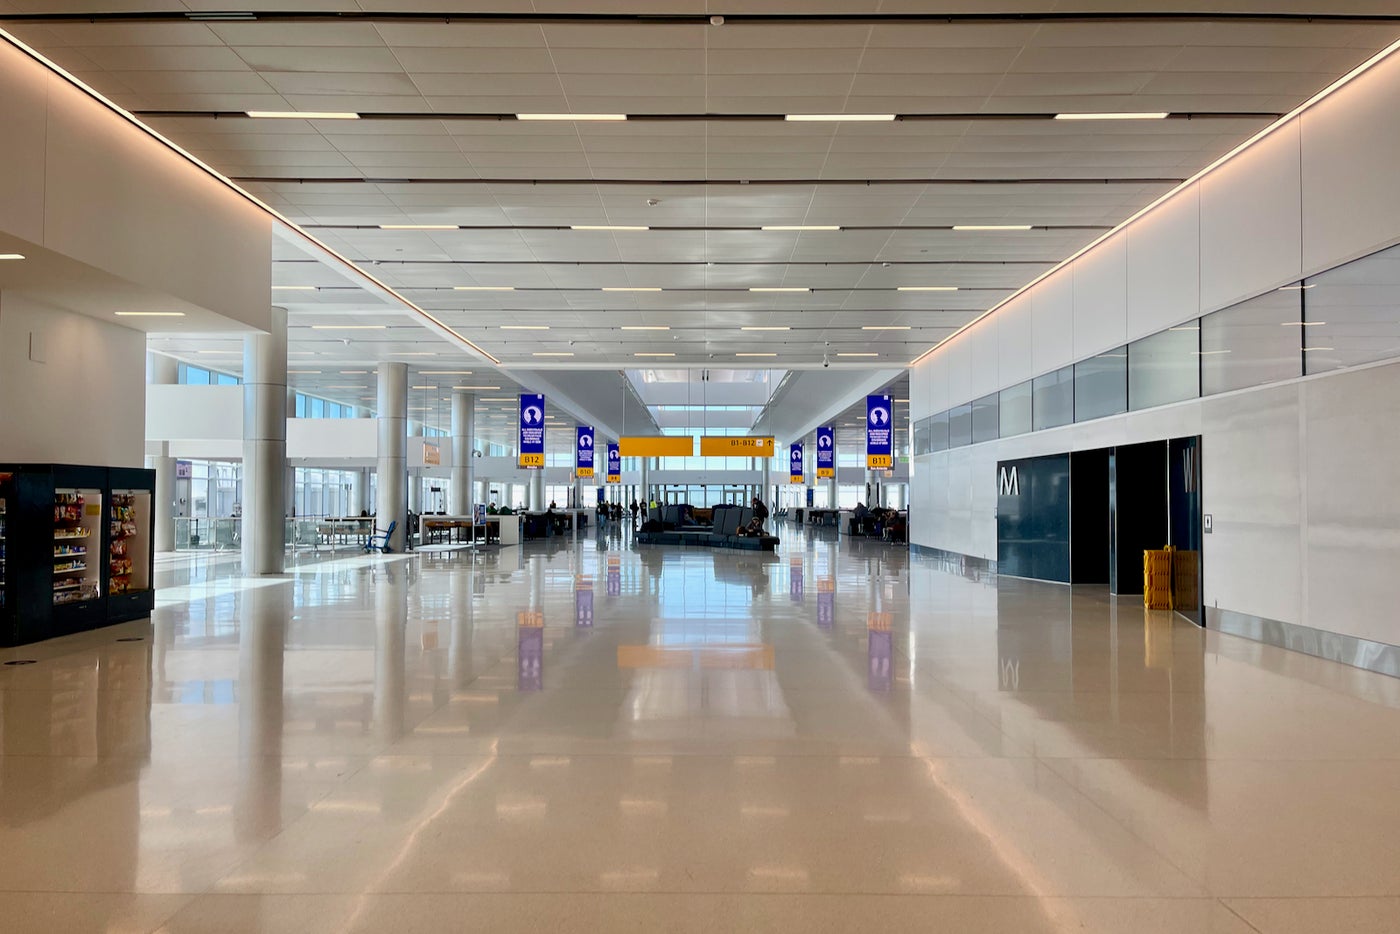 Your inside look at Denver Airport's new terminal expansion